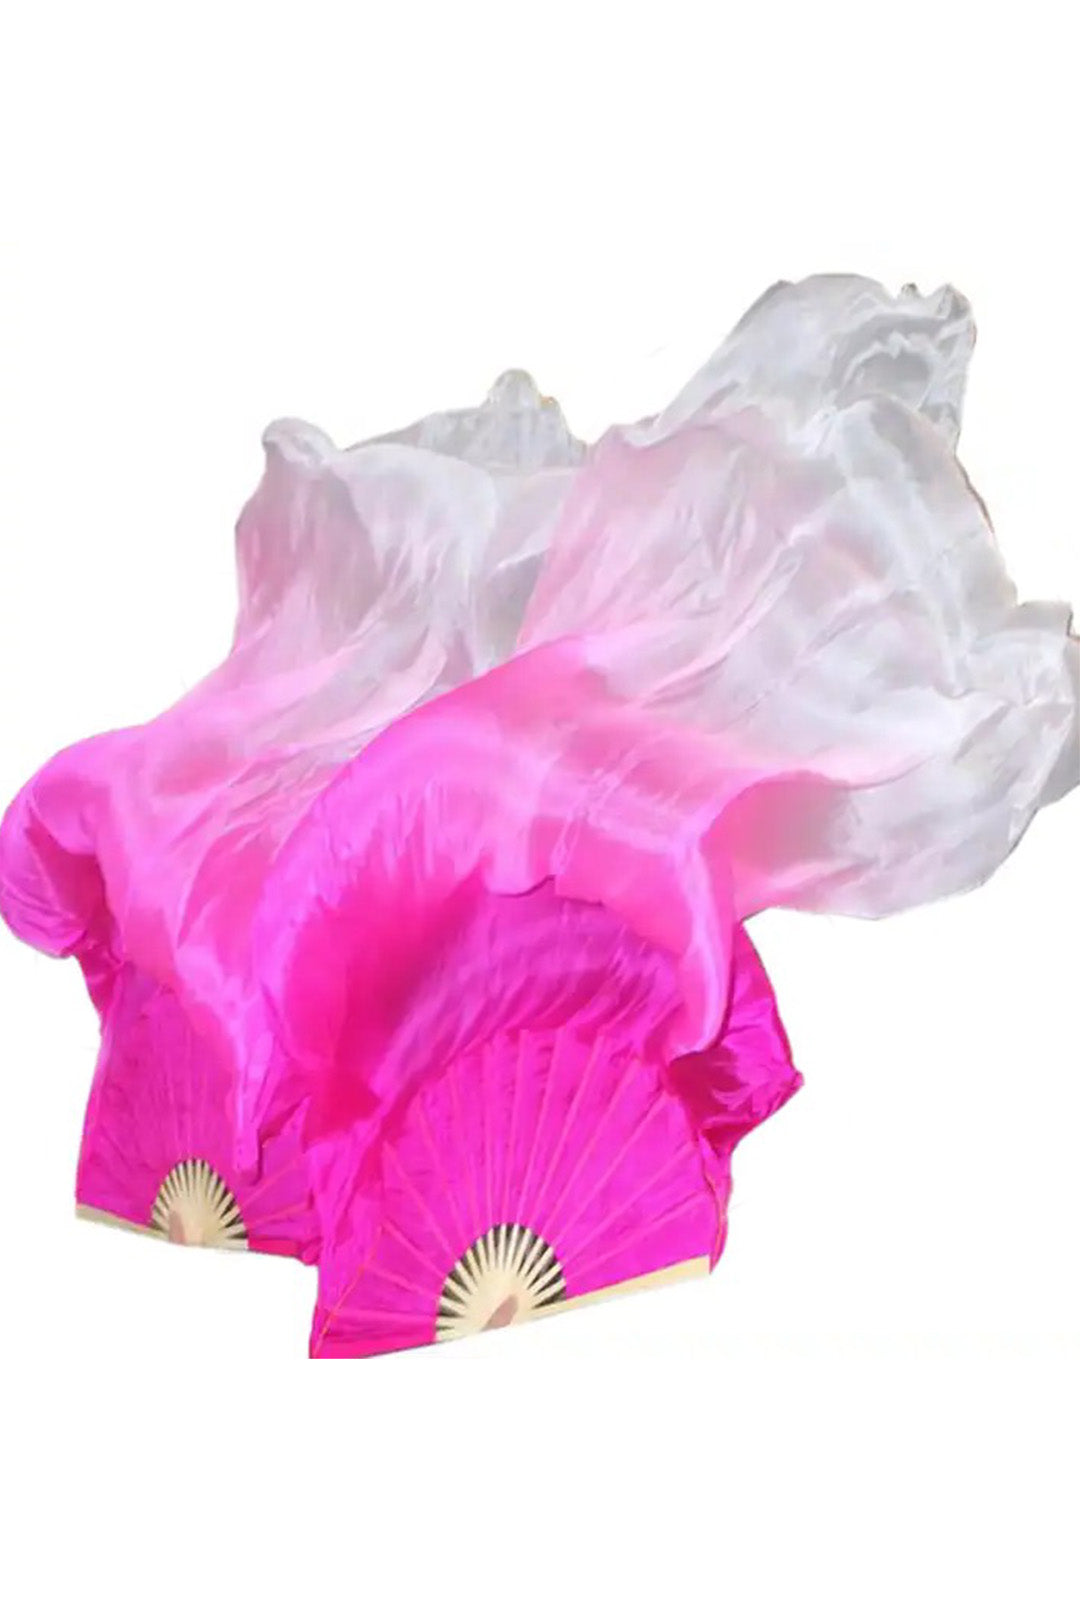 Gradient Pink and White Fan Veils